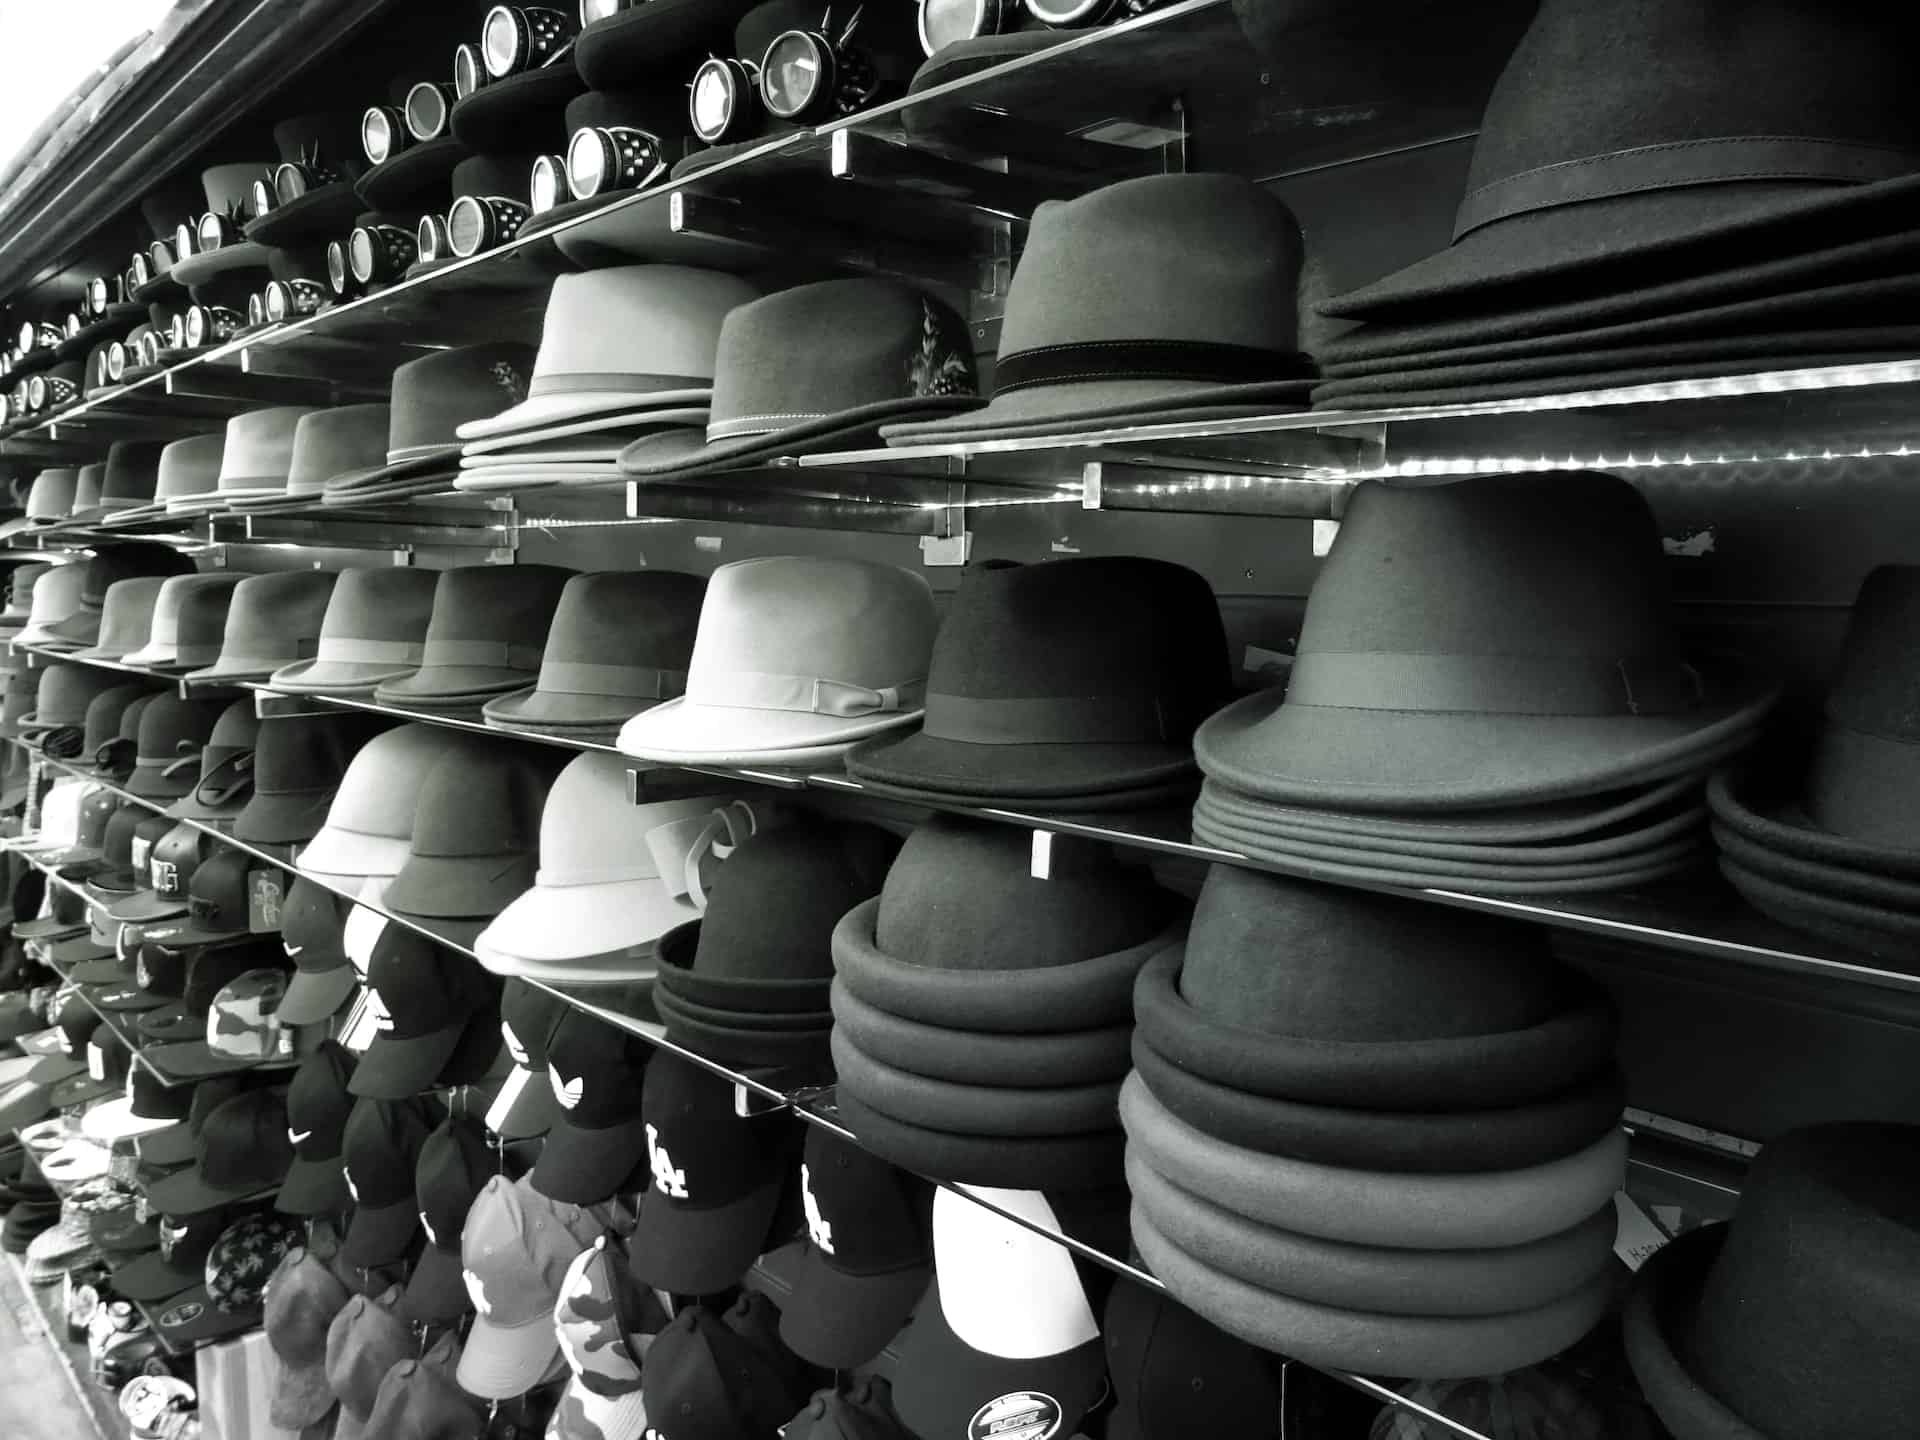 a wall of hats at a store